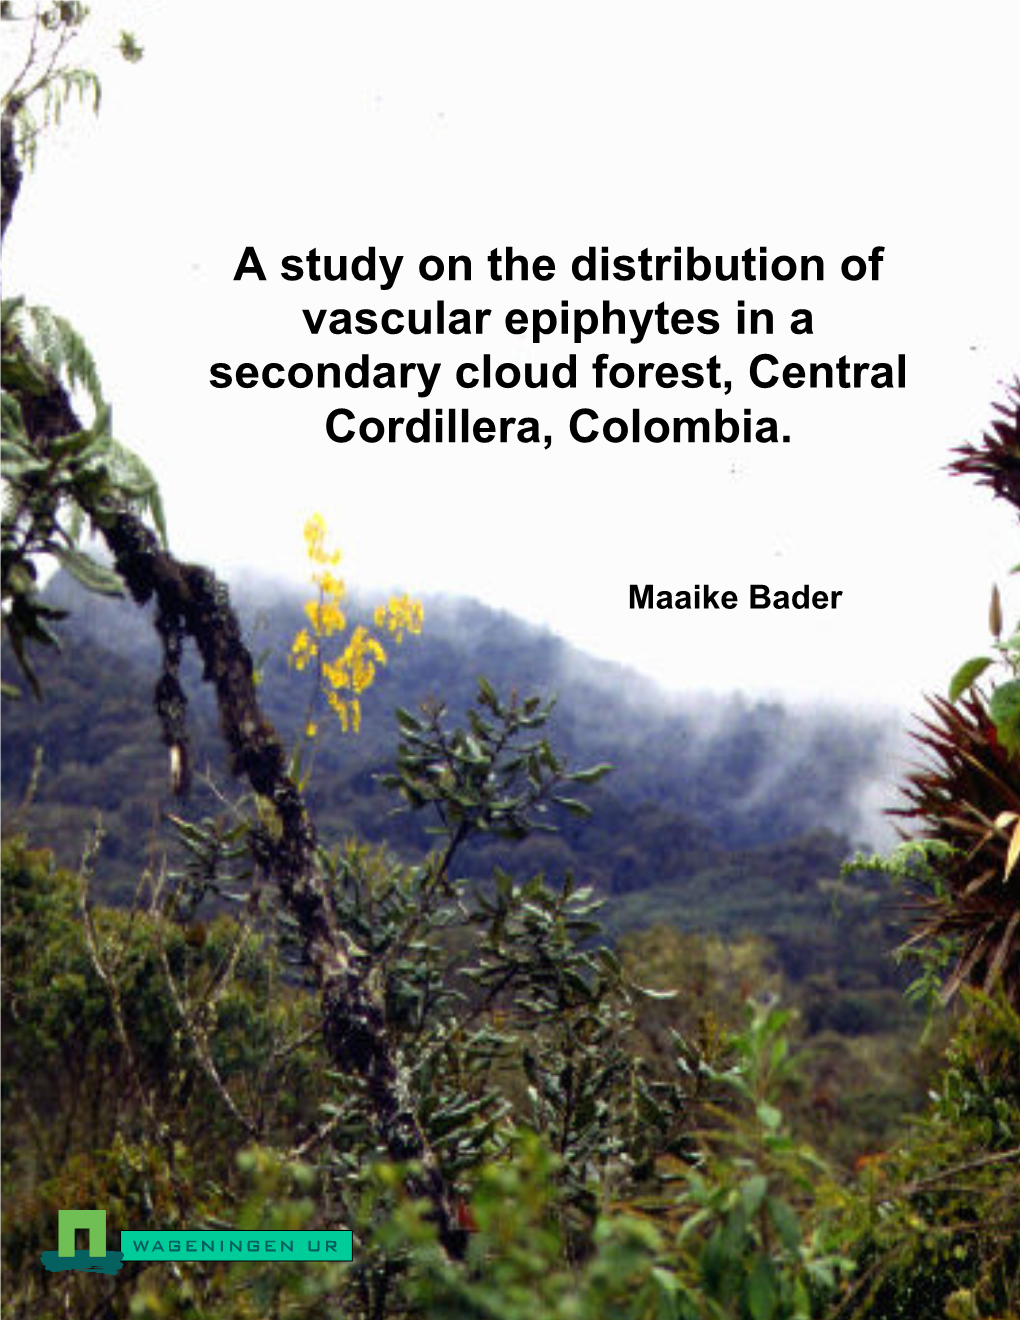 A Study on the Distribution of Vascular Epiphytes in a Secondary Cloud Forest, Central Cordillera, Colombia